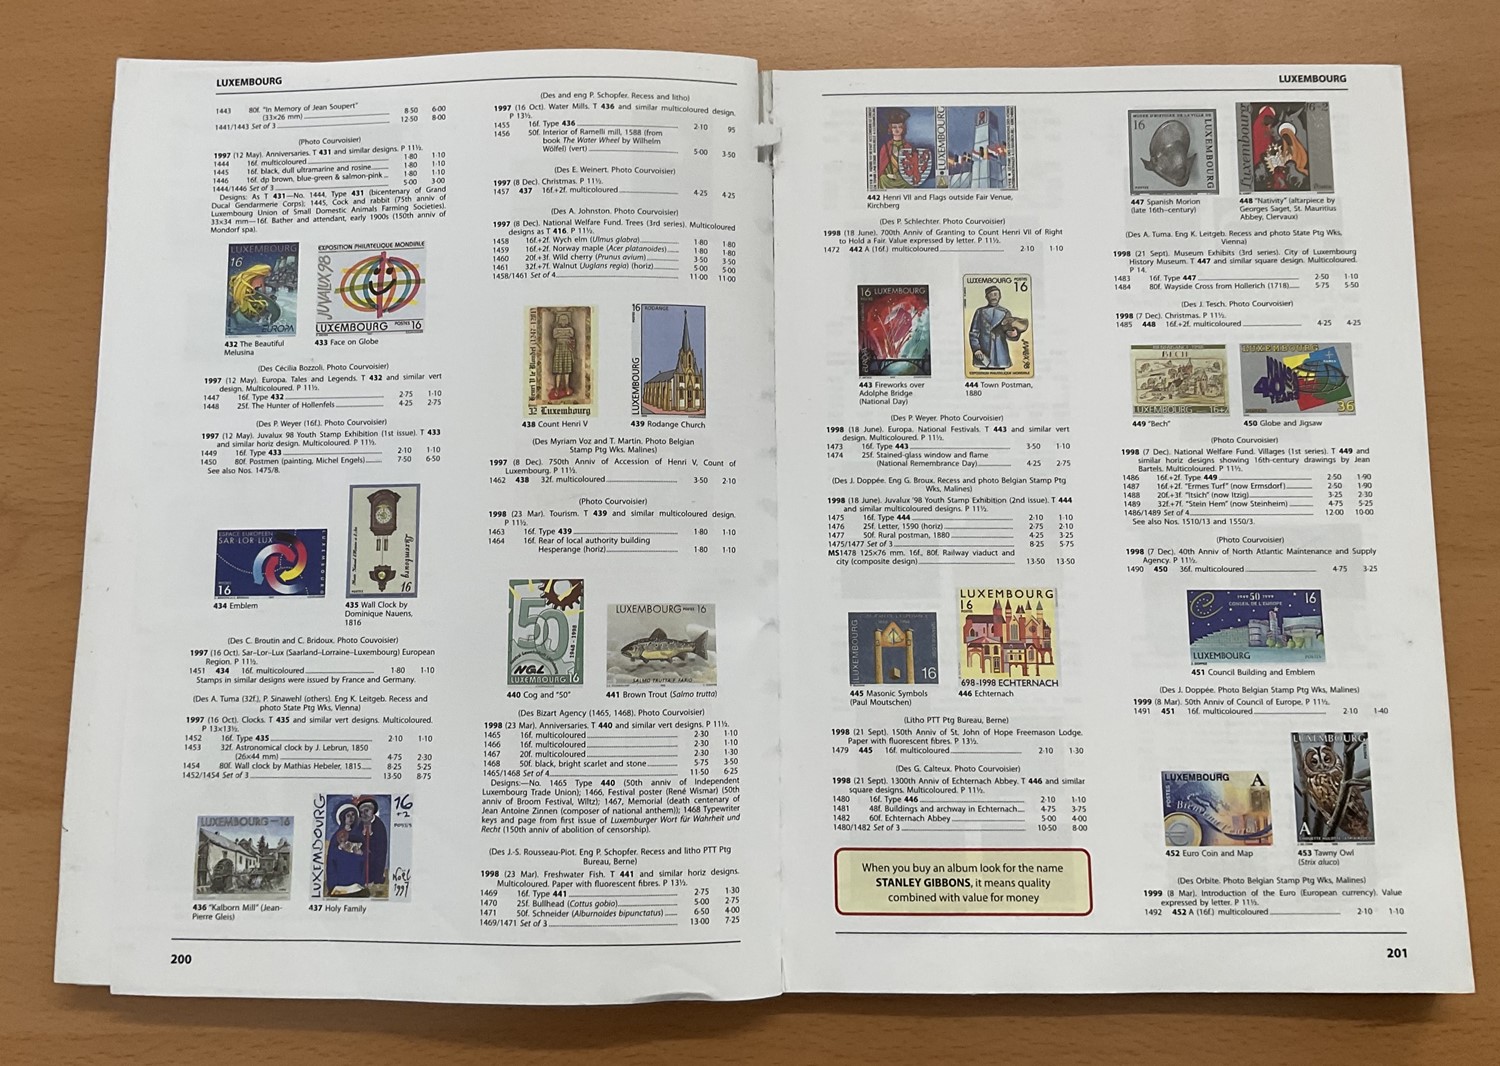 Stanley Gibbons Benelux stamp catalogue 6th Edition. Has damage to inside some pages are becoming - Image 2 of 3